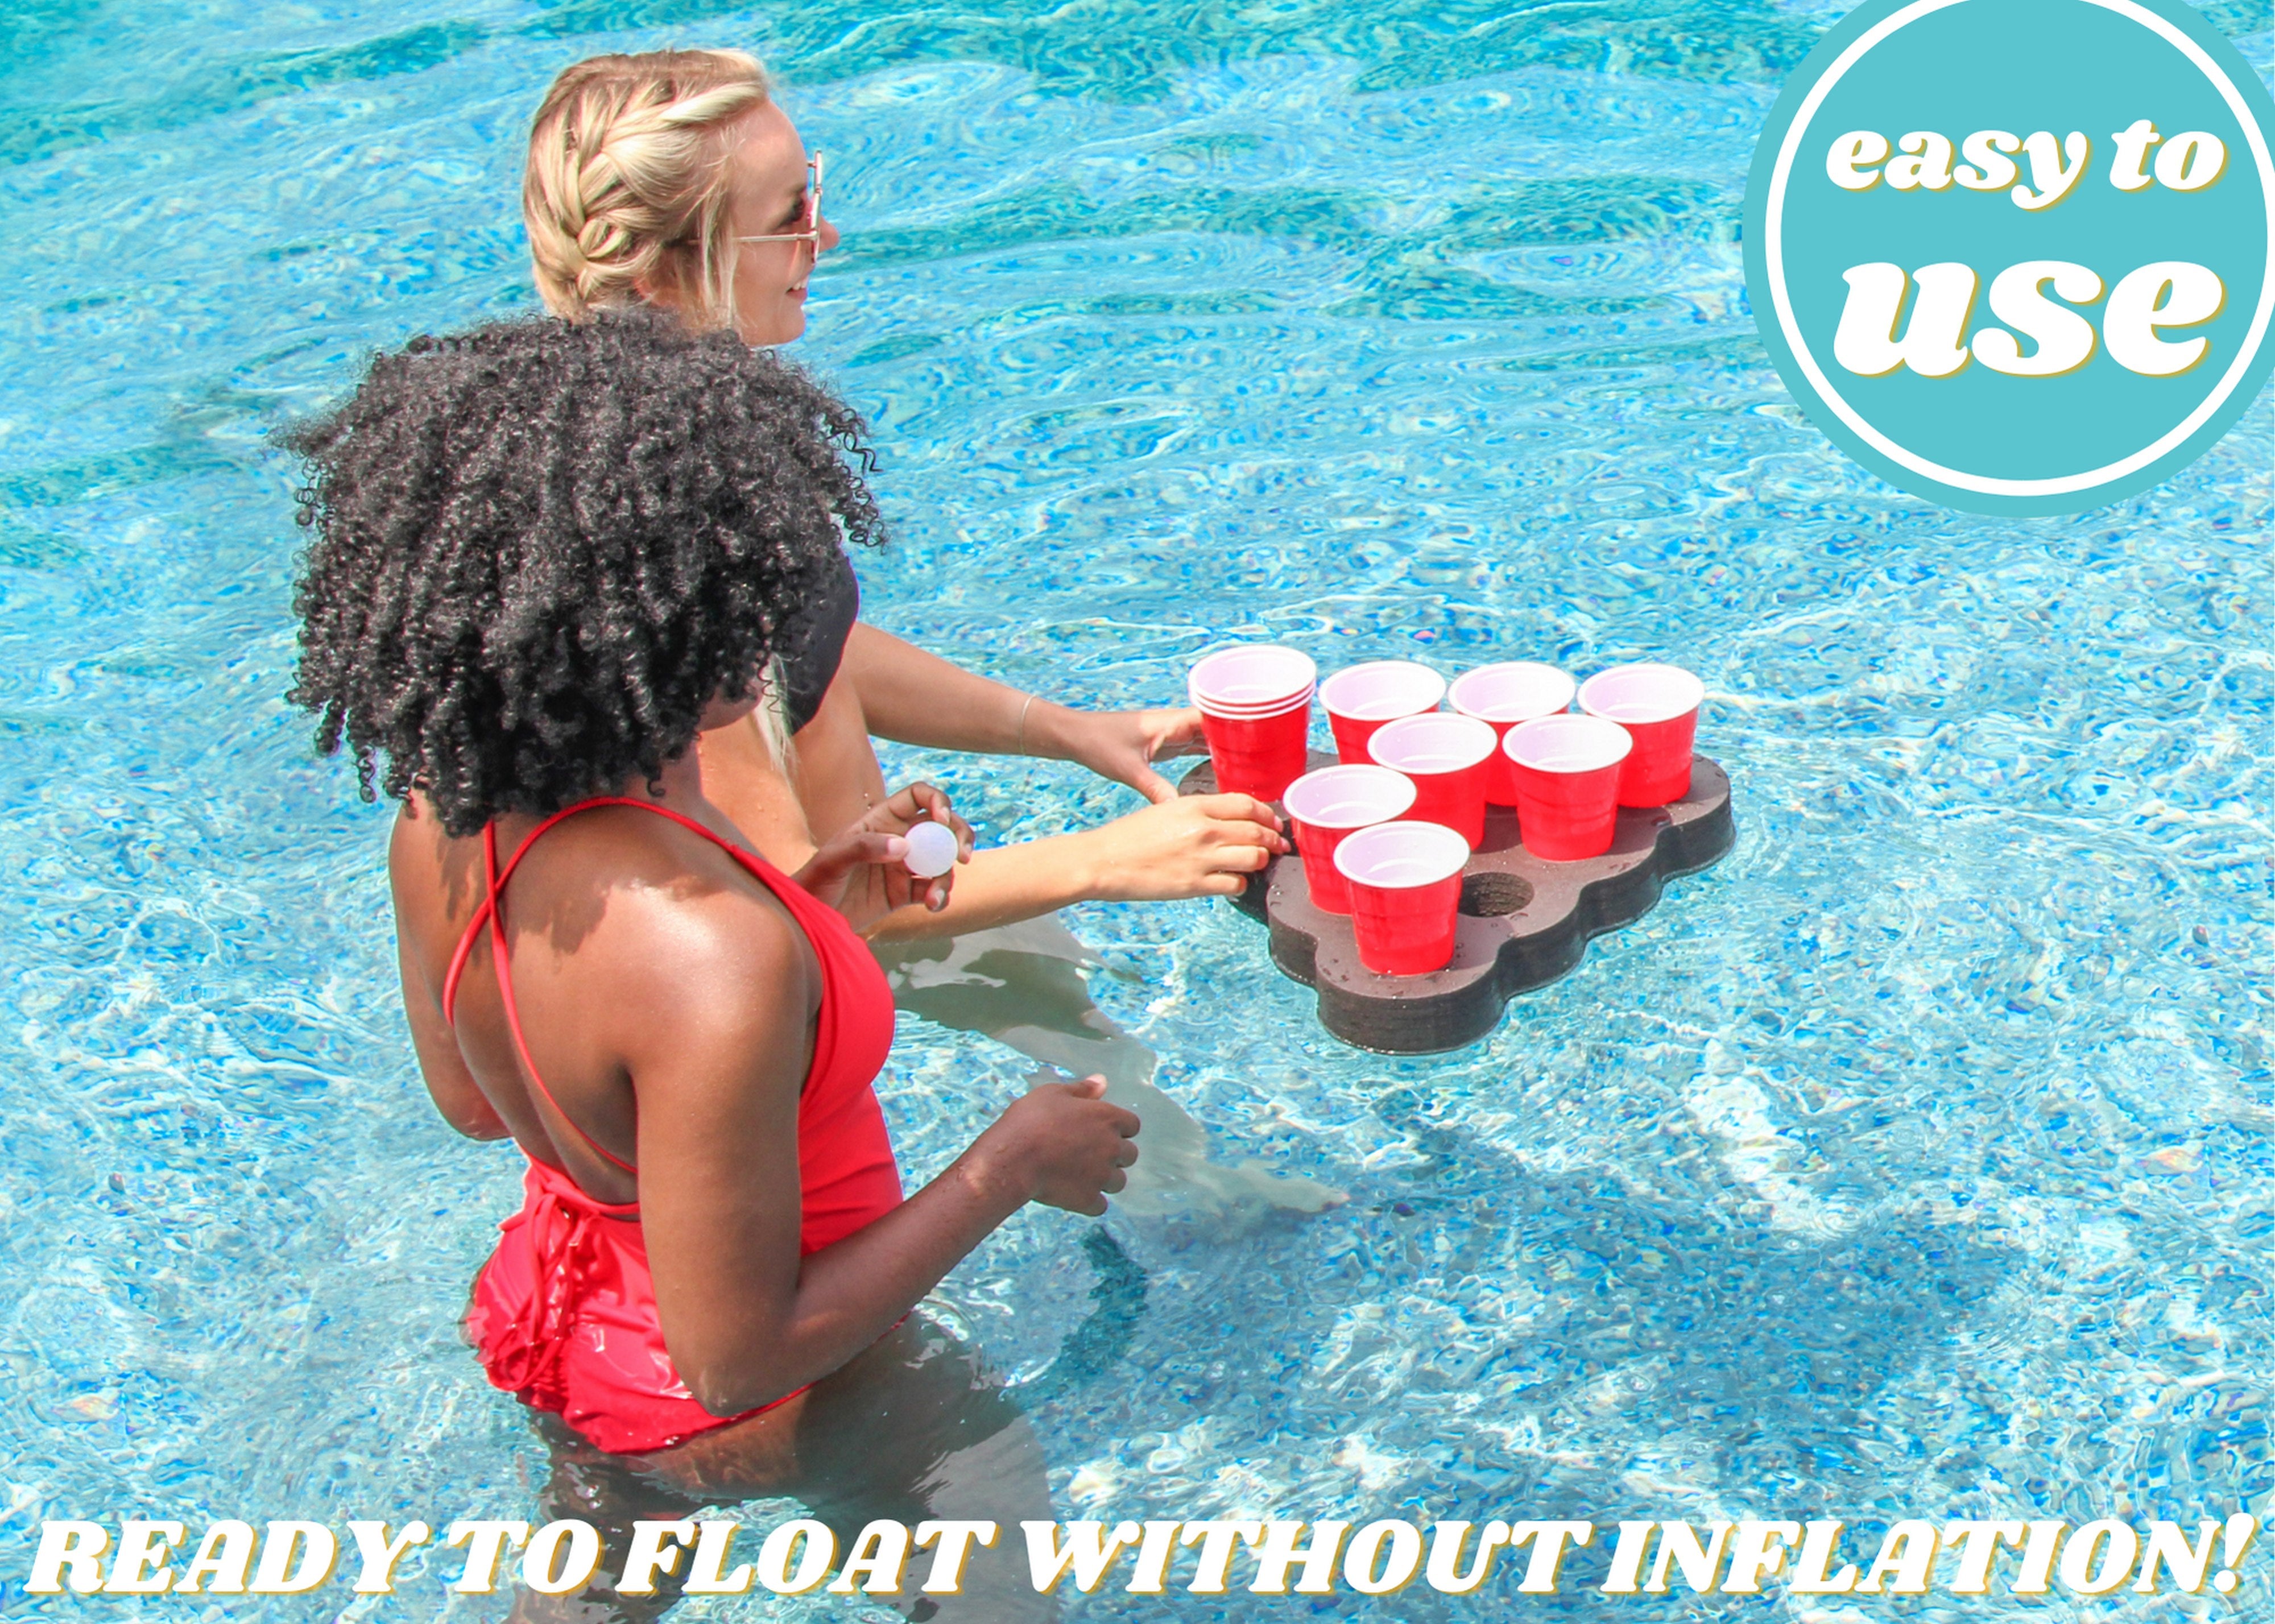 2pc Floating Beer Pong Table Rack Pool Party Game Float Beach Hot Tub Black Foam 10 Hole Standard Setup Balls Included UV Resistant Pair Set